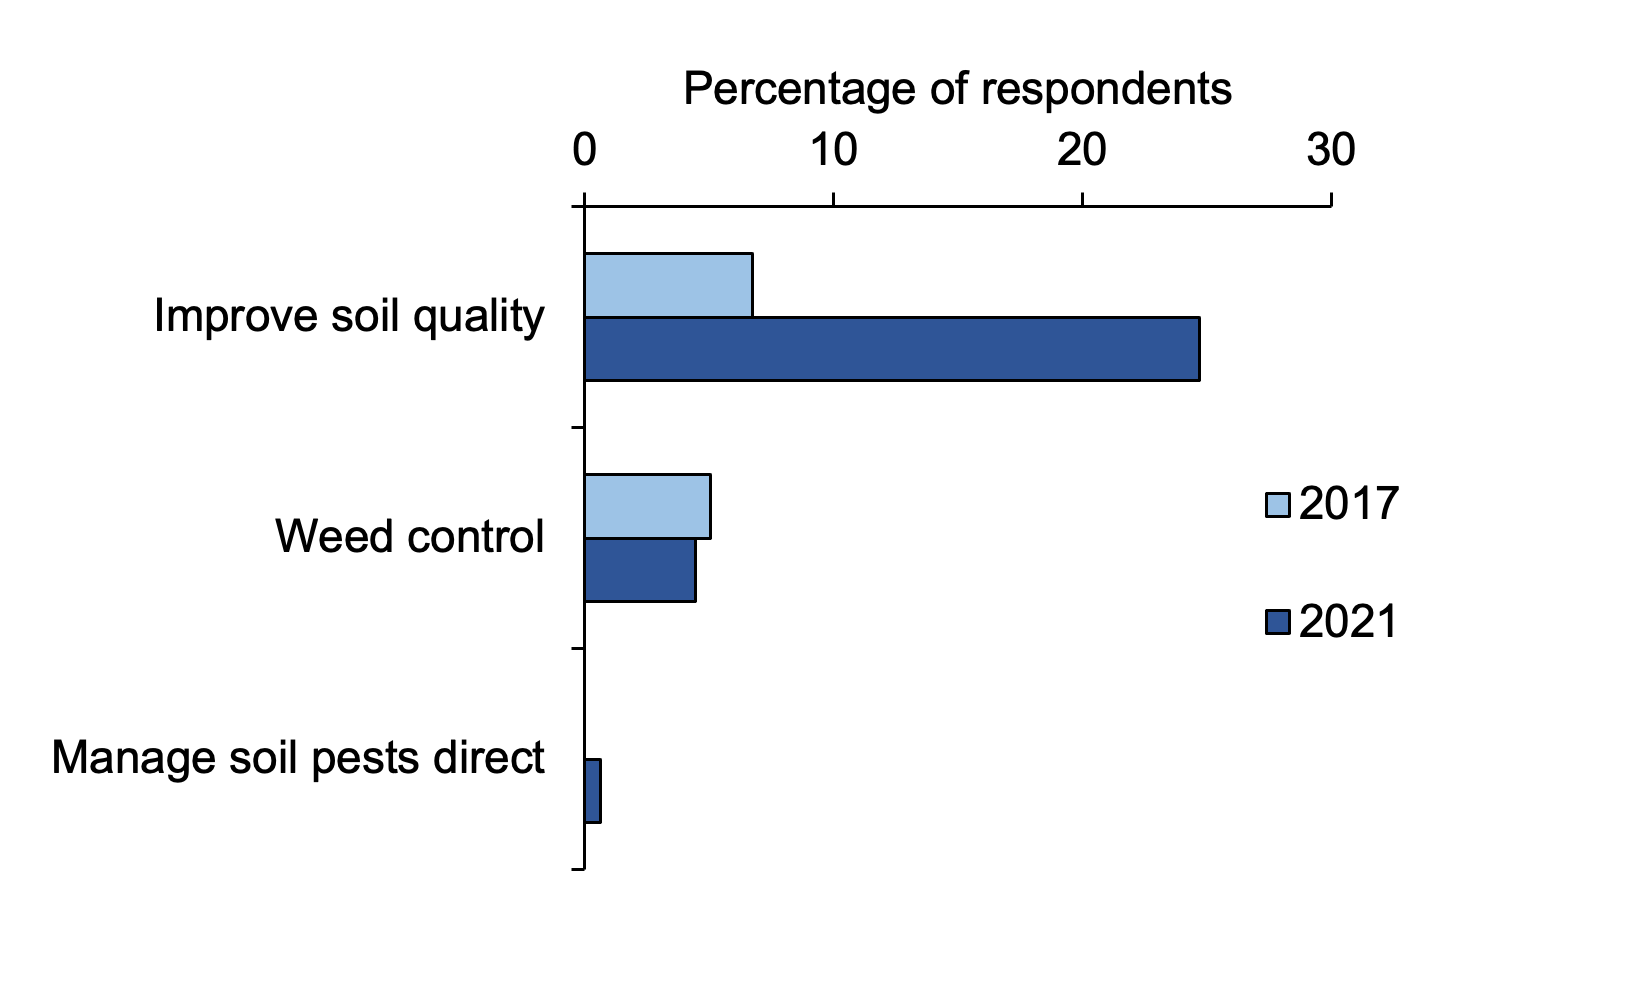 IPM: Bar chart of percentage responses to questions about catch and cover cropping where improving soil quality is most common reason in 2021.